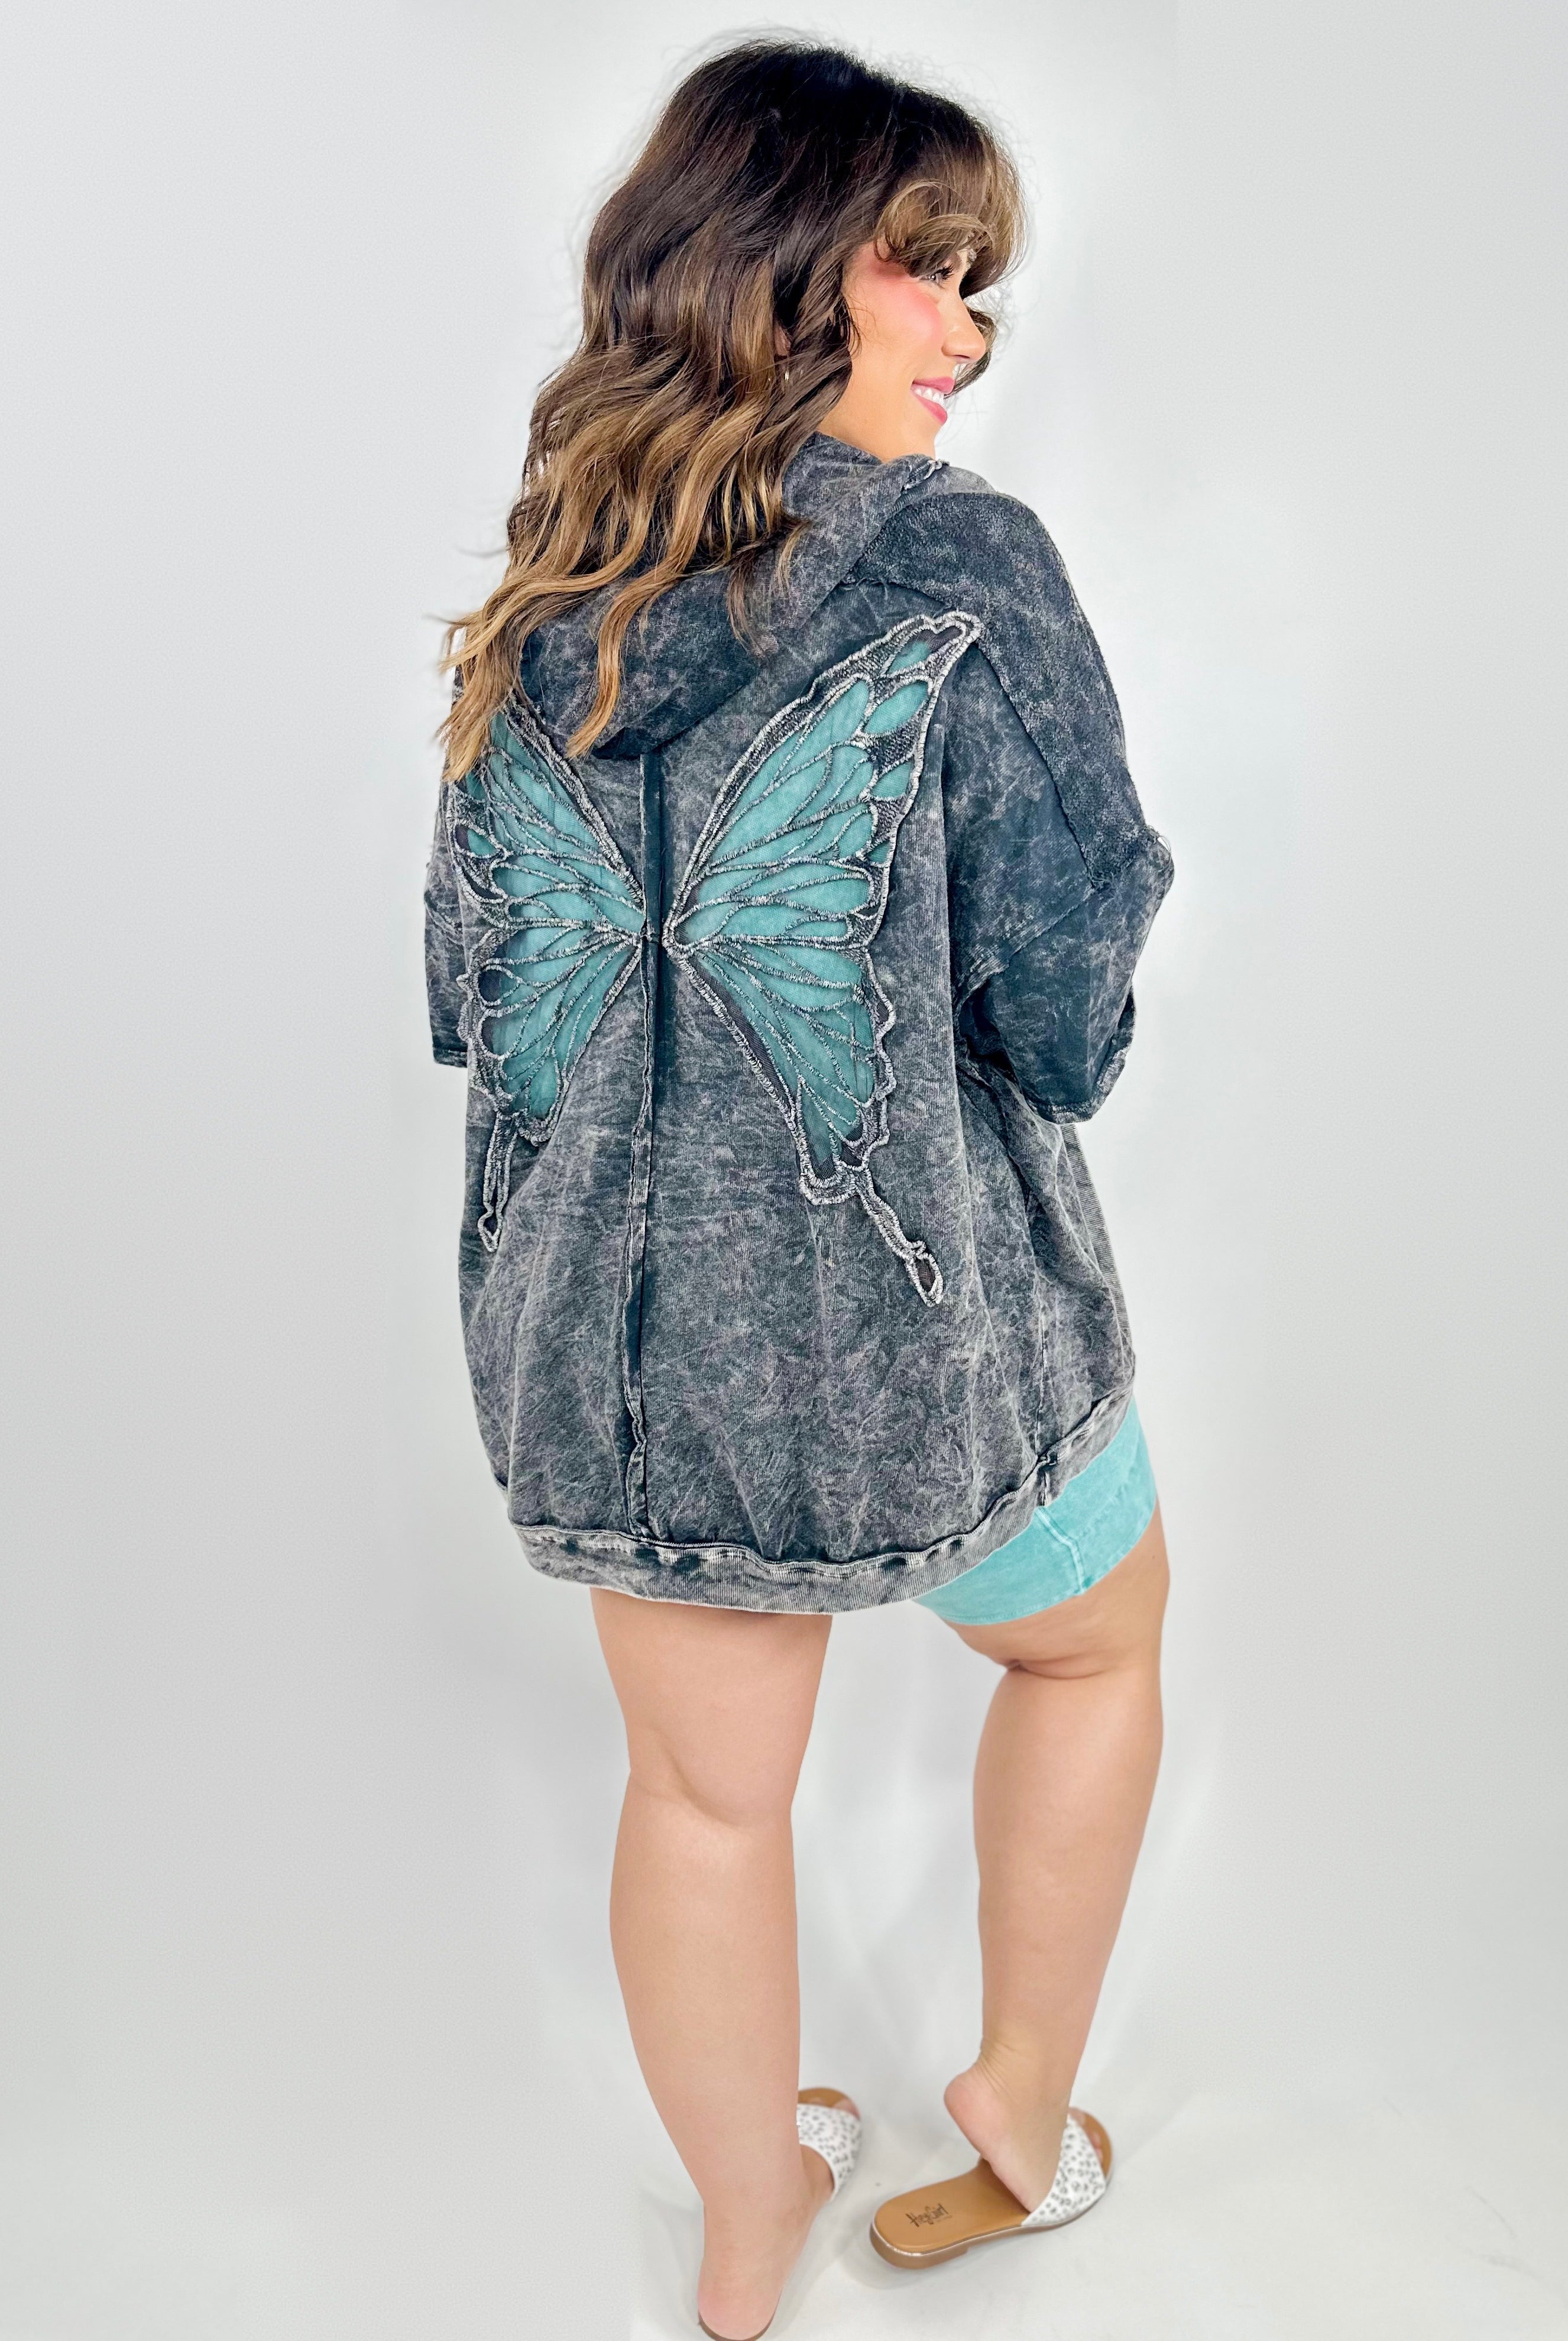 Mariposa Cardigan Hoodie - Ashed Black-210 Hoodies-J. Her-Heathered Boho Boutique, Women's Fashion and Accessories in Palmetto, FL